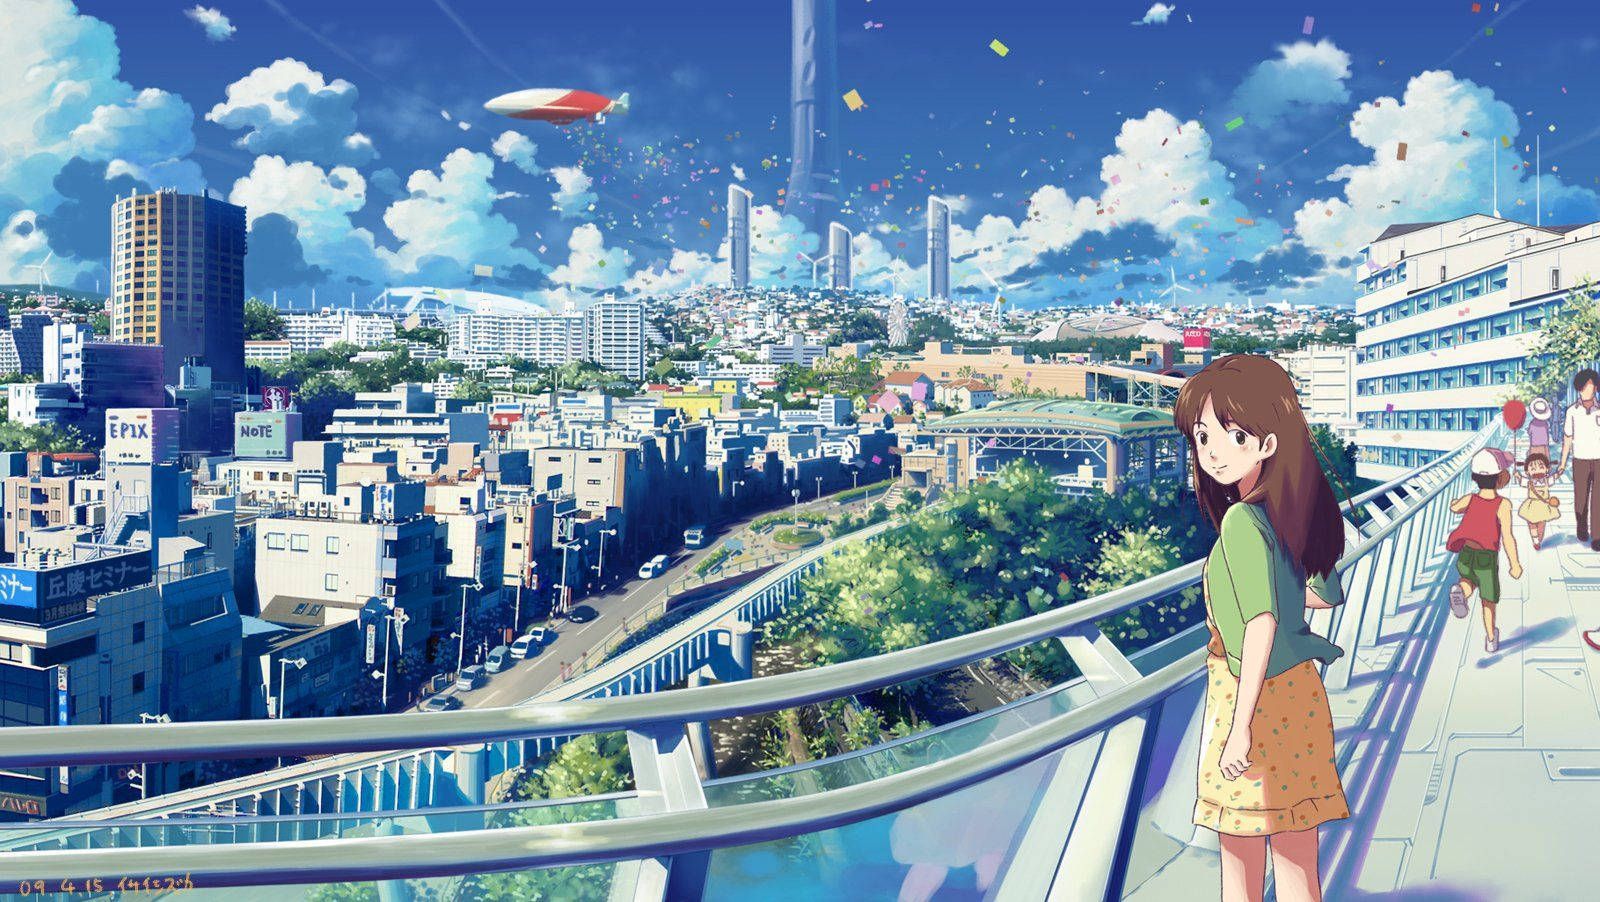 Free Anime City Wallpaper Downloads, Anime City Wallpaper for FREE